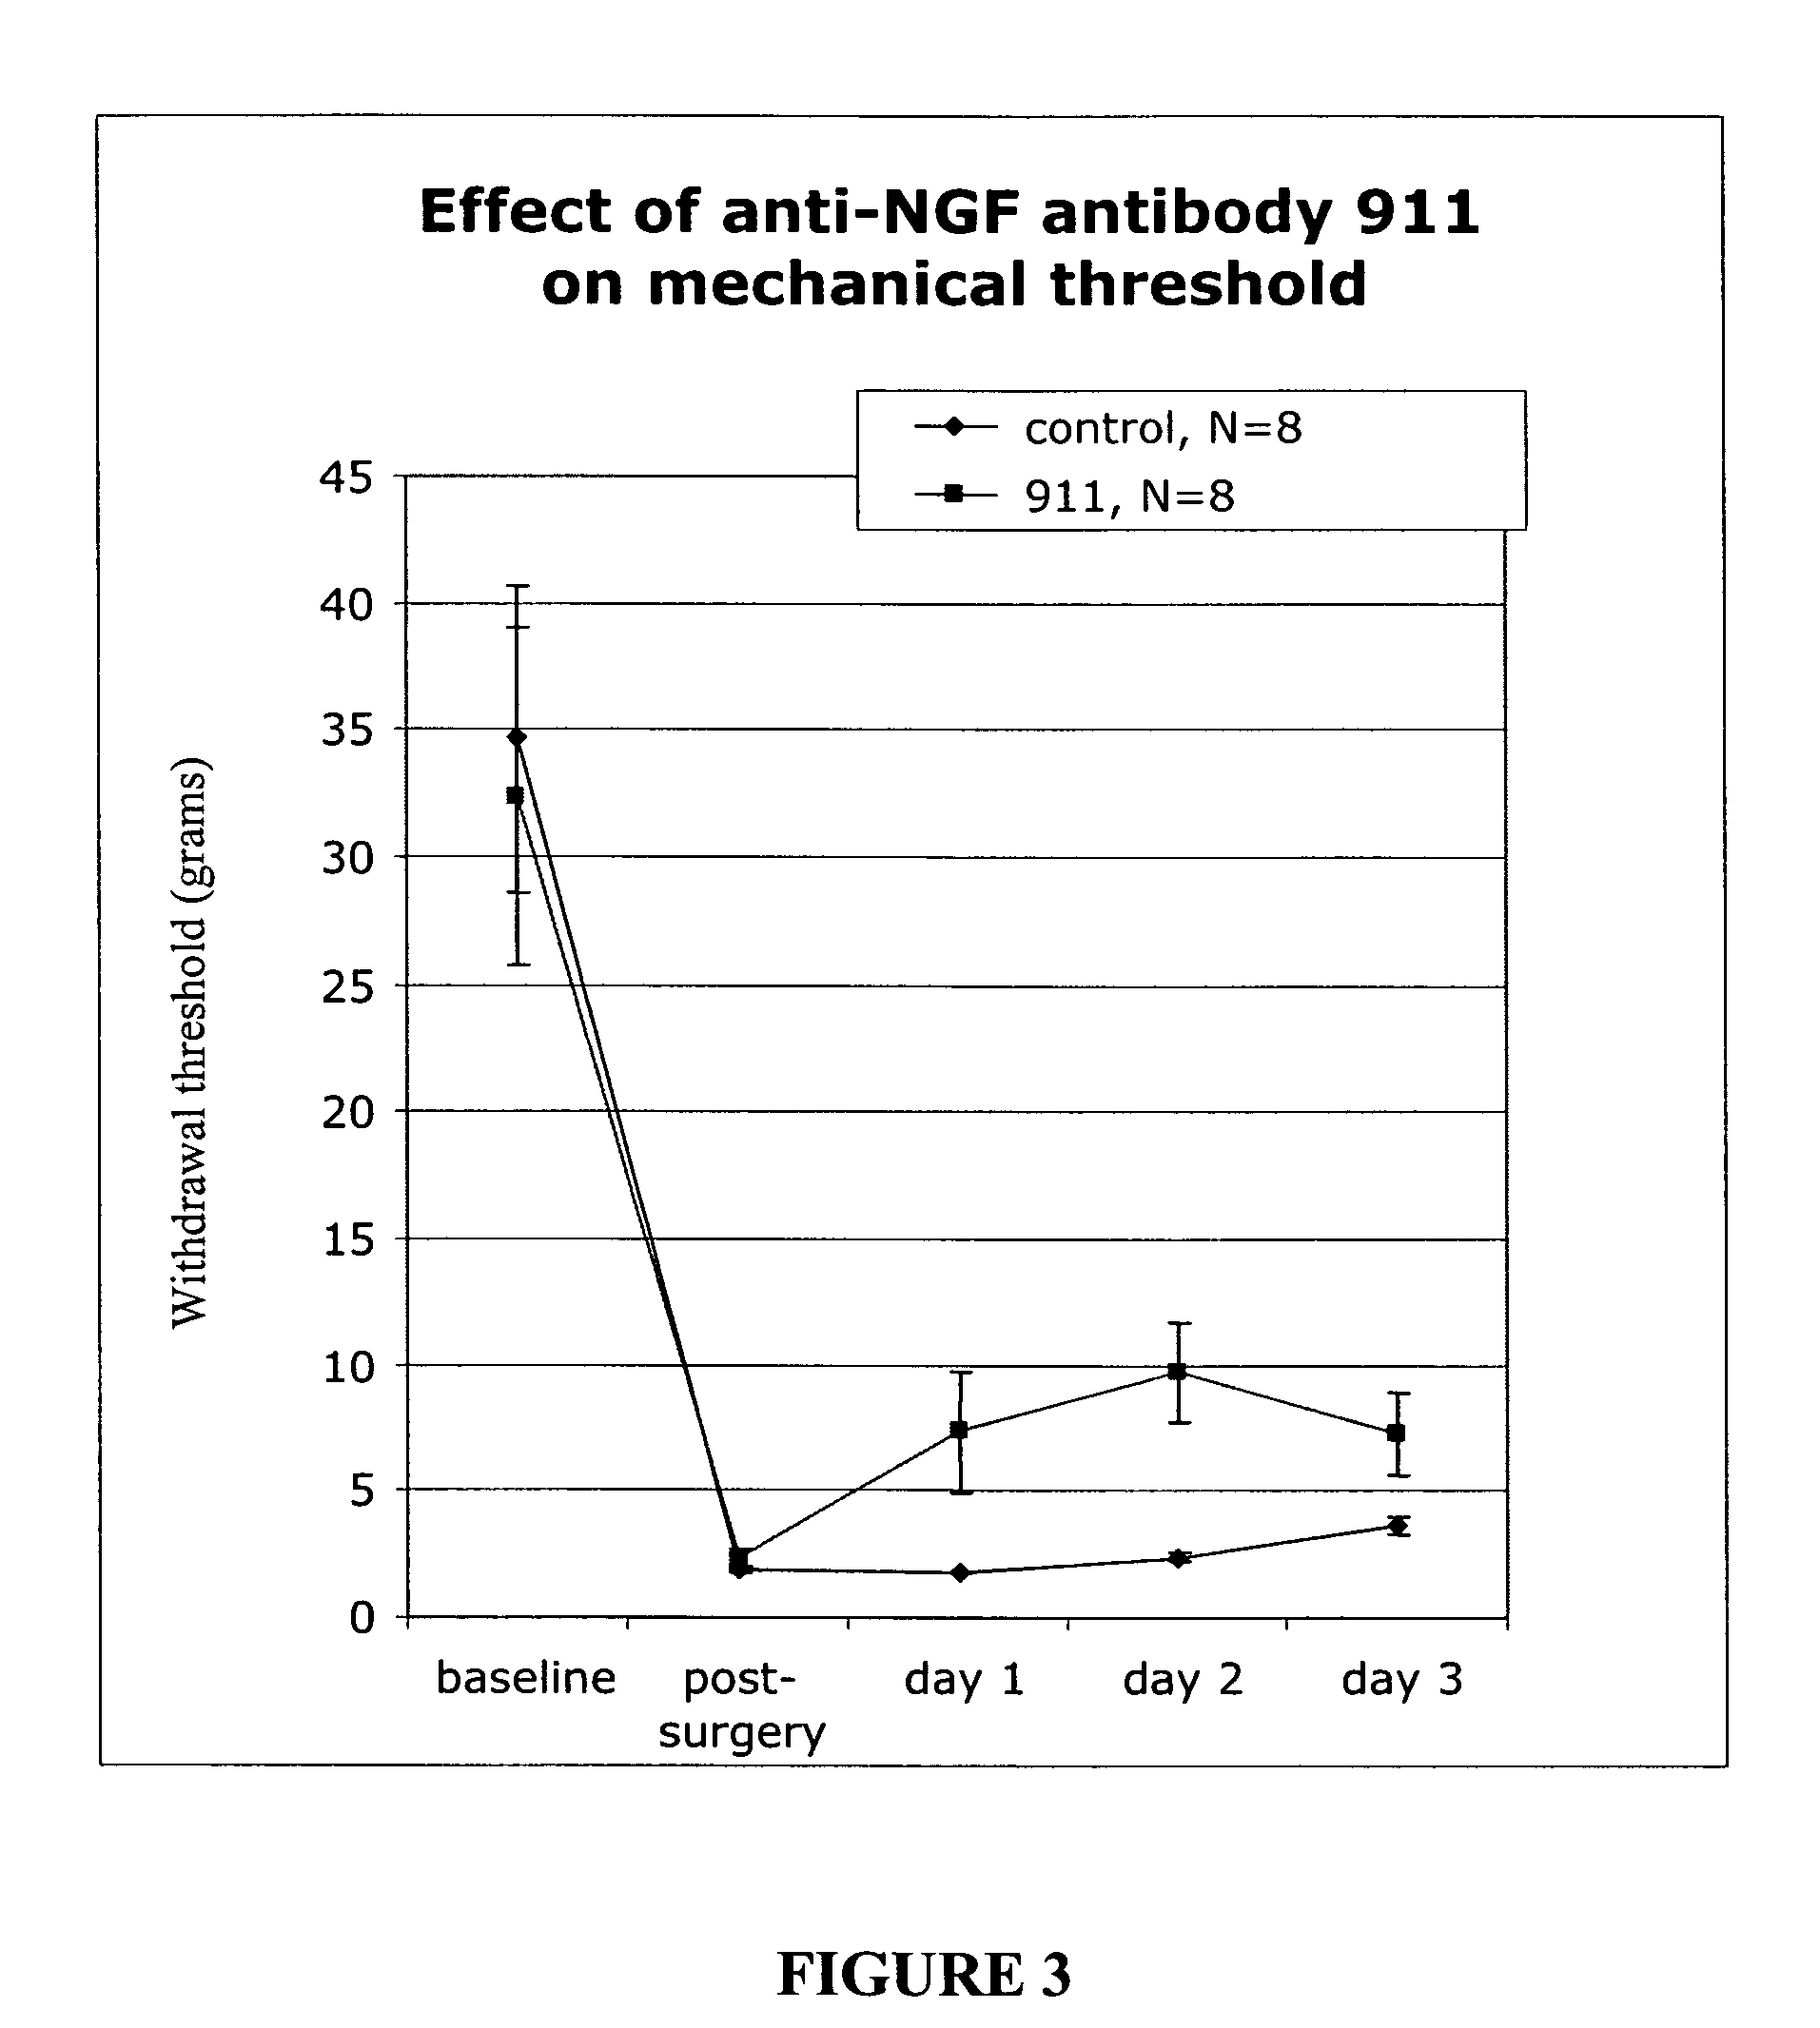 Methods for treating post-surgical pain by administering an anti-nerve growth factor antagonist